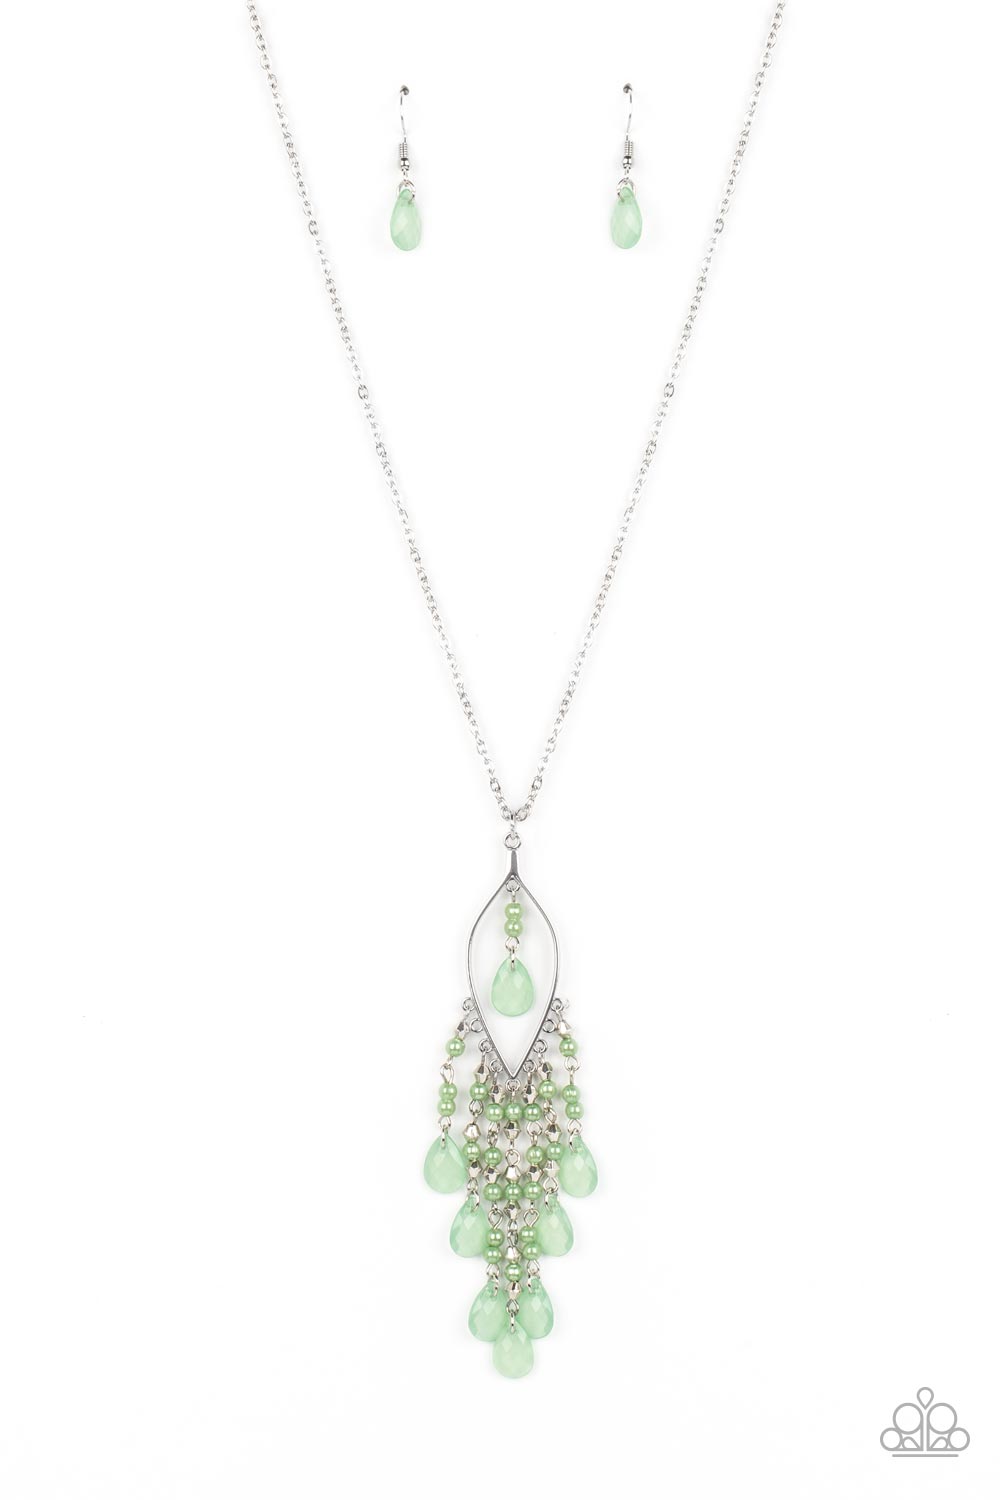 Sweet DREAMCATCHER - Green Pearl and Silver Necklace - Paparazzi Accessories - Dainty spearmint pearls, silver accents, and spearmint teardrop beads in an opaque finish cascade from the bottom of an airy silver almond-shaped frame. A strand of spearmint pearls and a solitaire spearmint teardrop bead swing from the top of the frame in an elegant finish, as the pendant slides along a classic silver chain.